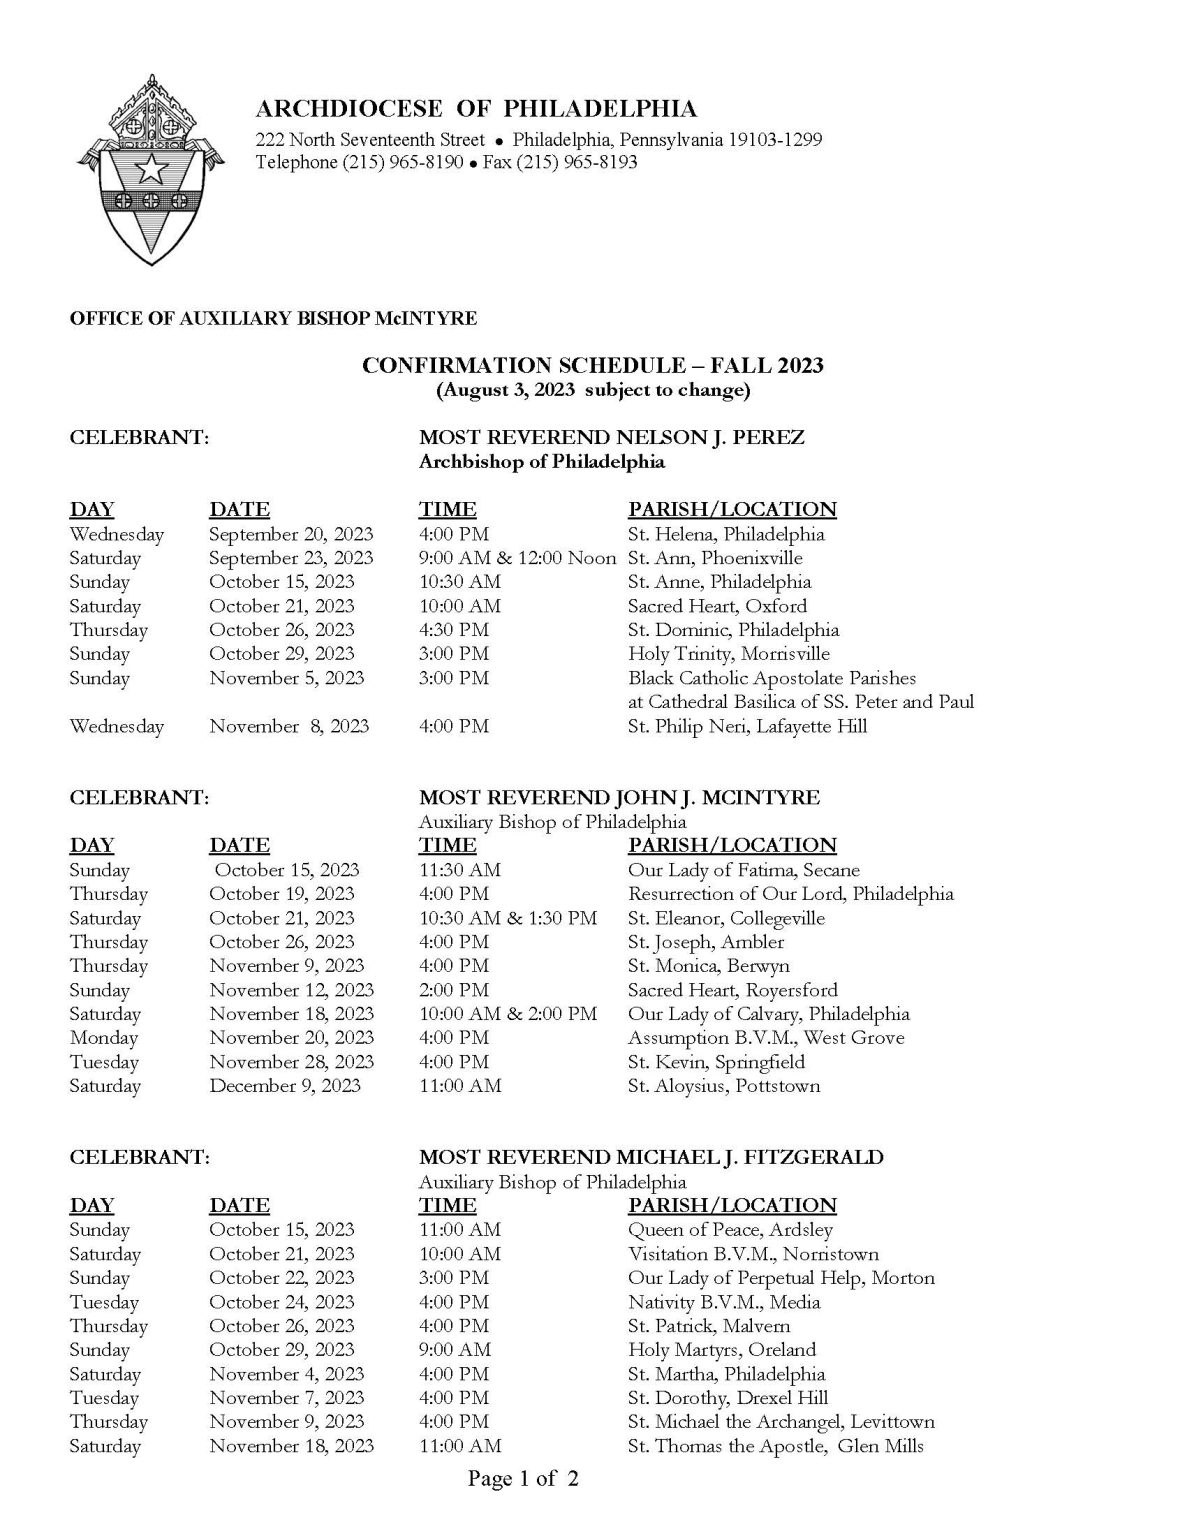 CONFIRMATION SCHEDULE FALL 2023 Archdiocese of Philadelphia